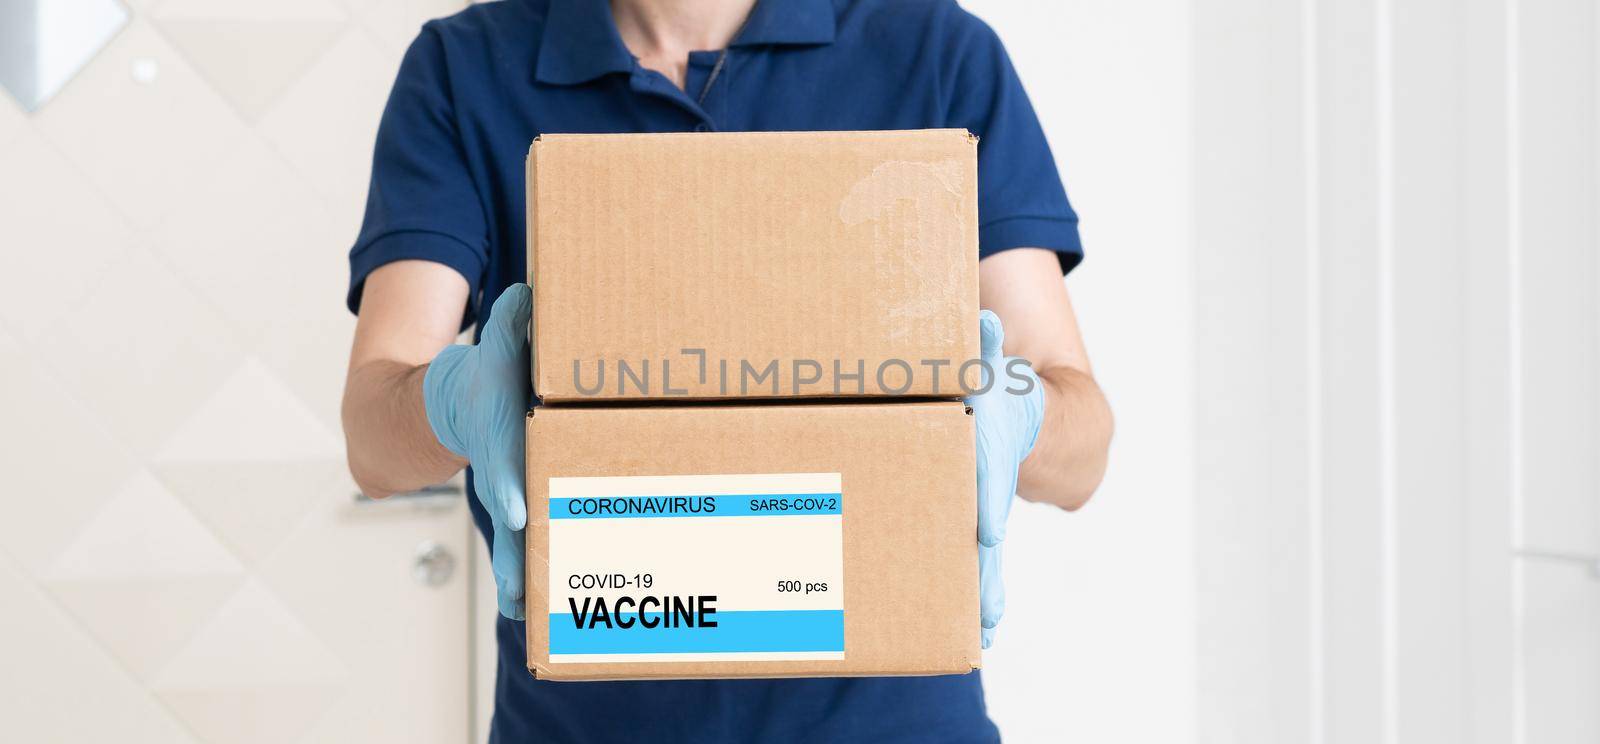 the man delivers the vaccine. Placing VACCINE label on the cardboard box.